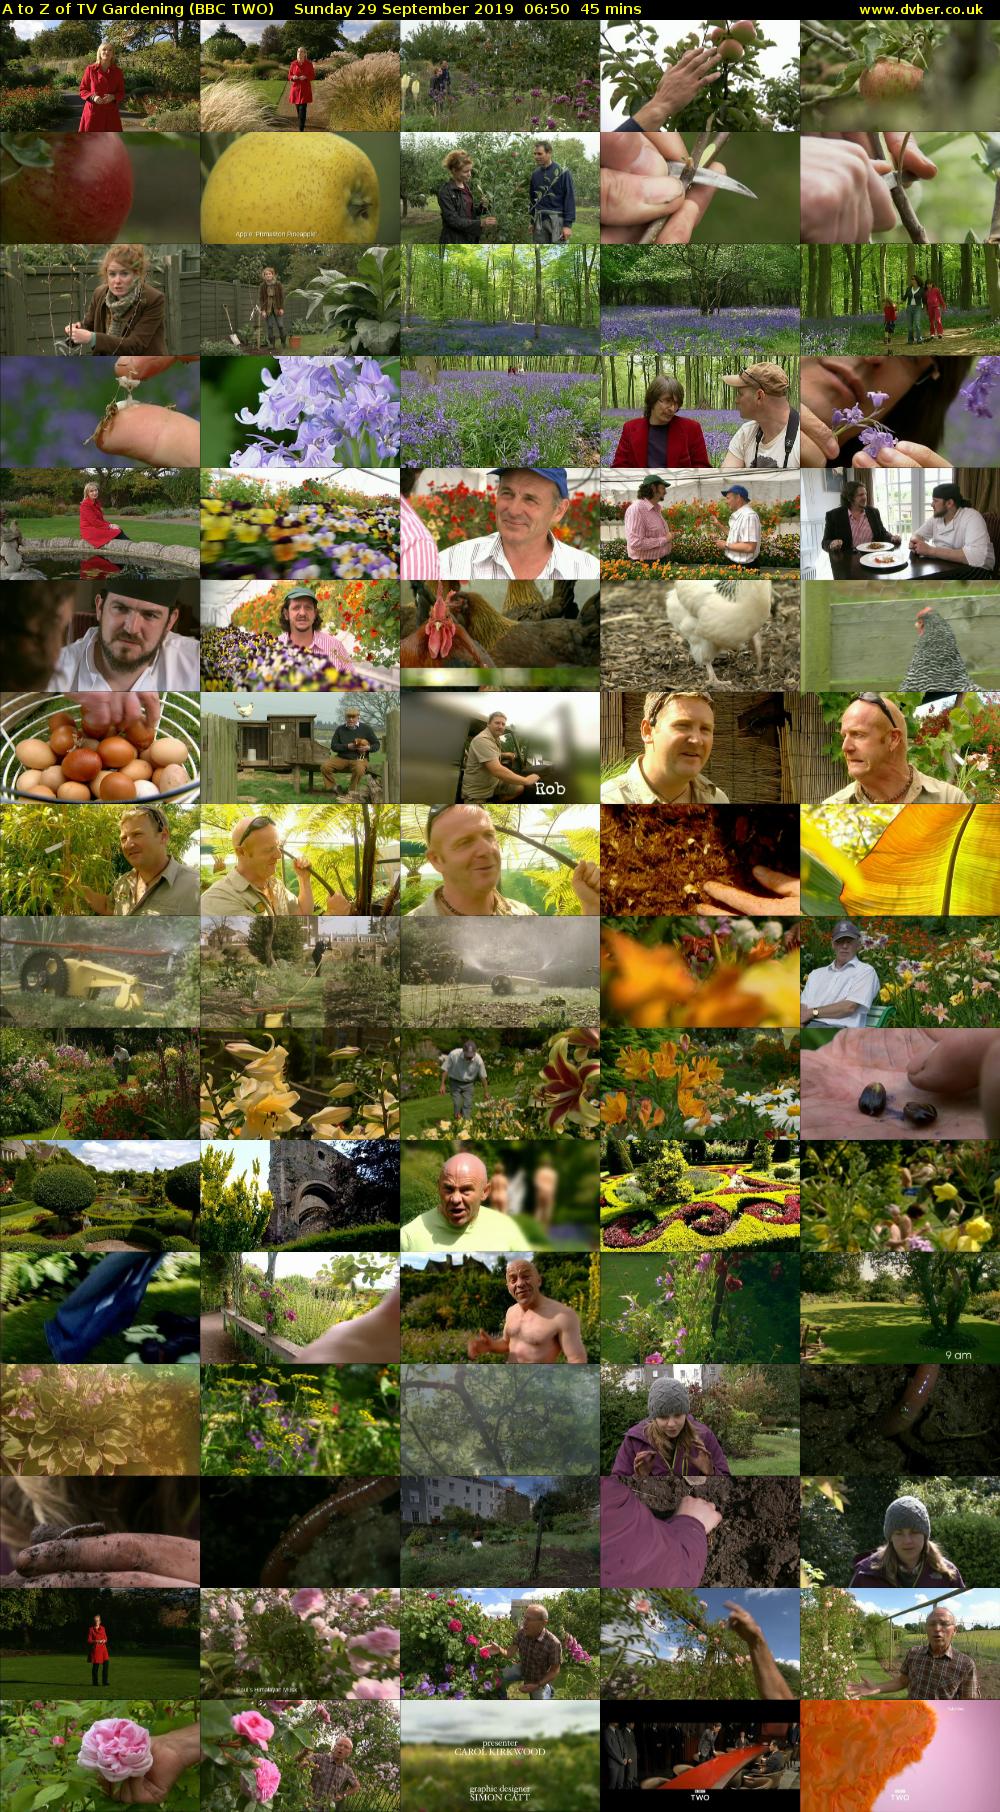 A to Z of TV Gardening (BBC TWO) Sunday 29 September 2019 06:50 - 07:35